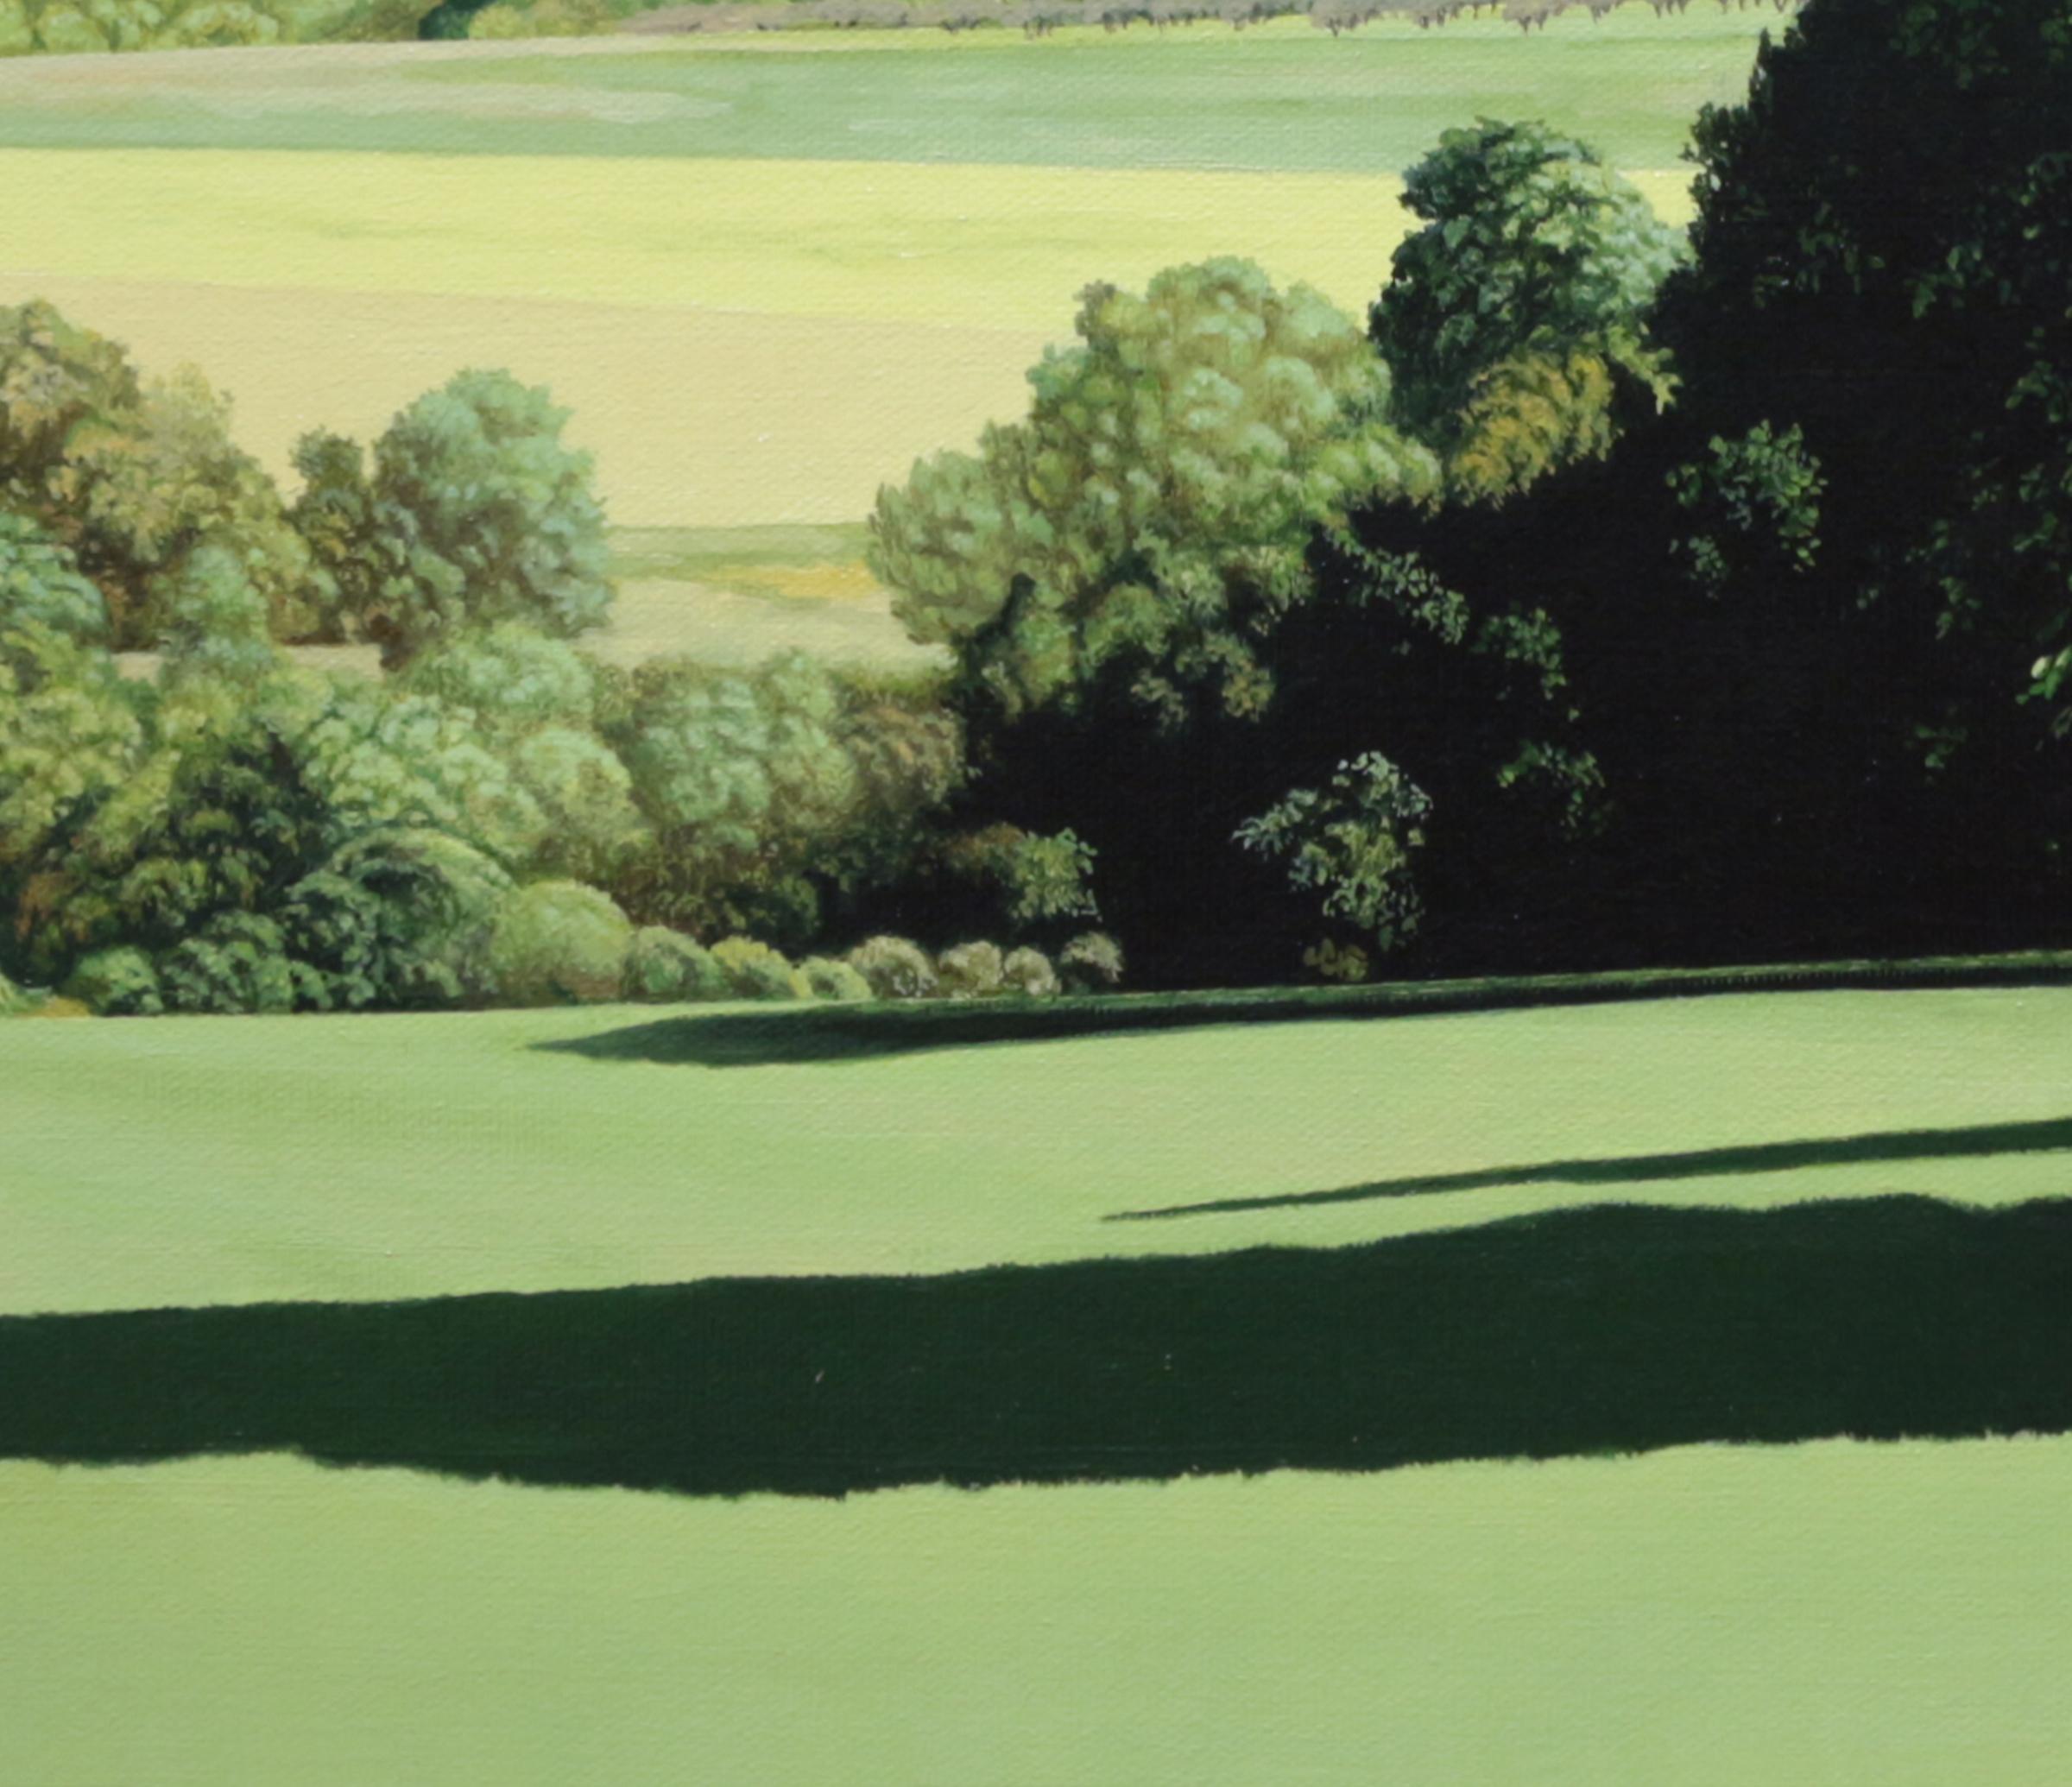 LONG SHADOWS IN THE MORNING - Contemporary Realism / Country Park / Nature Scene - Green Landscape Painting by Anita Mazzucca